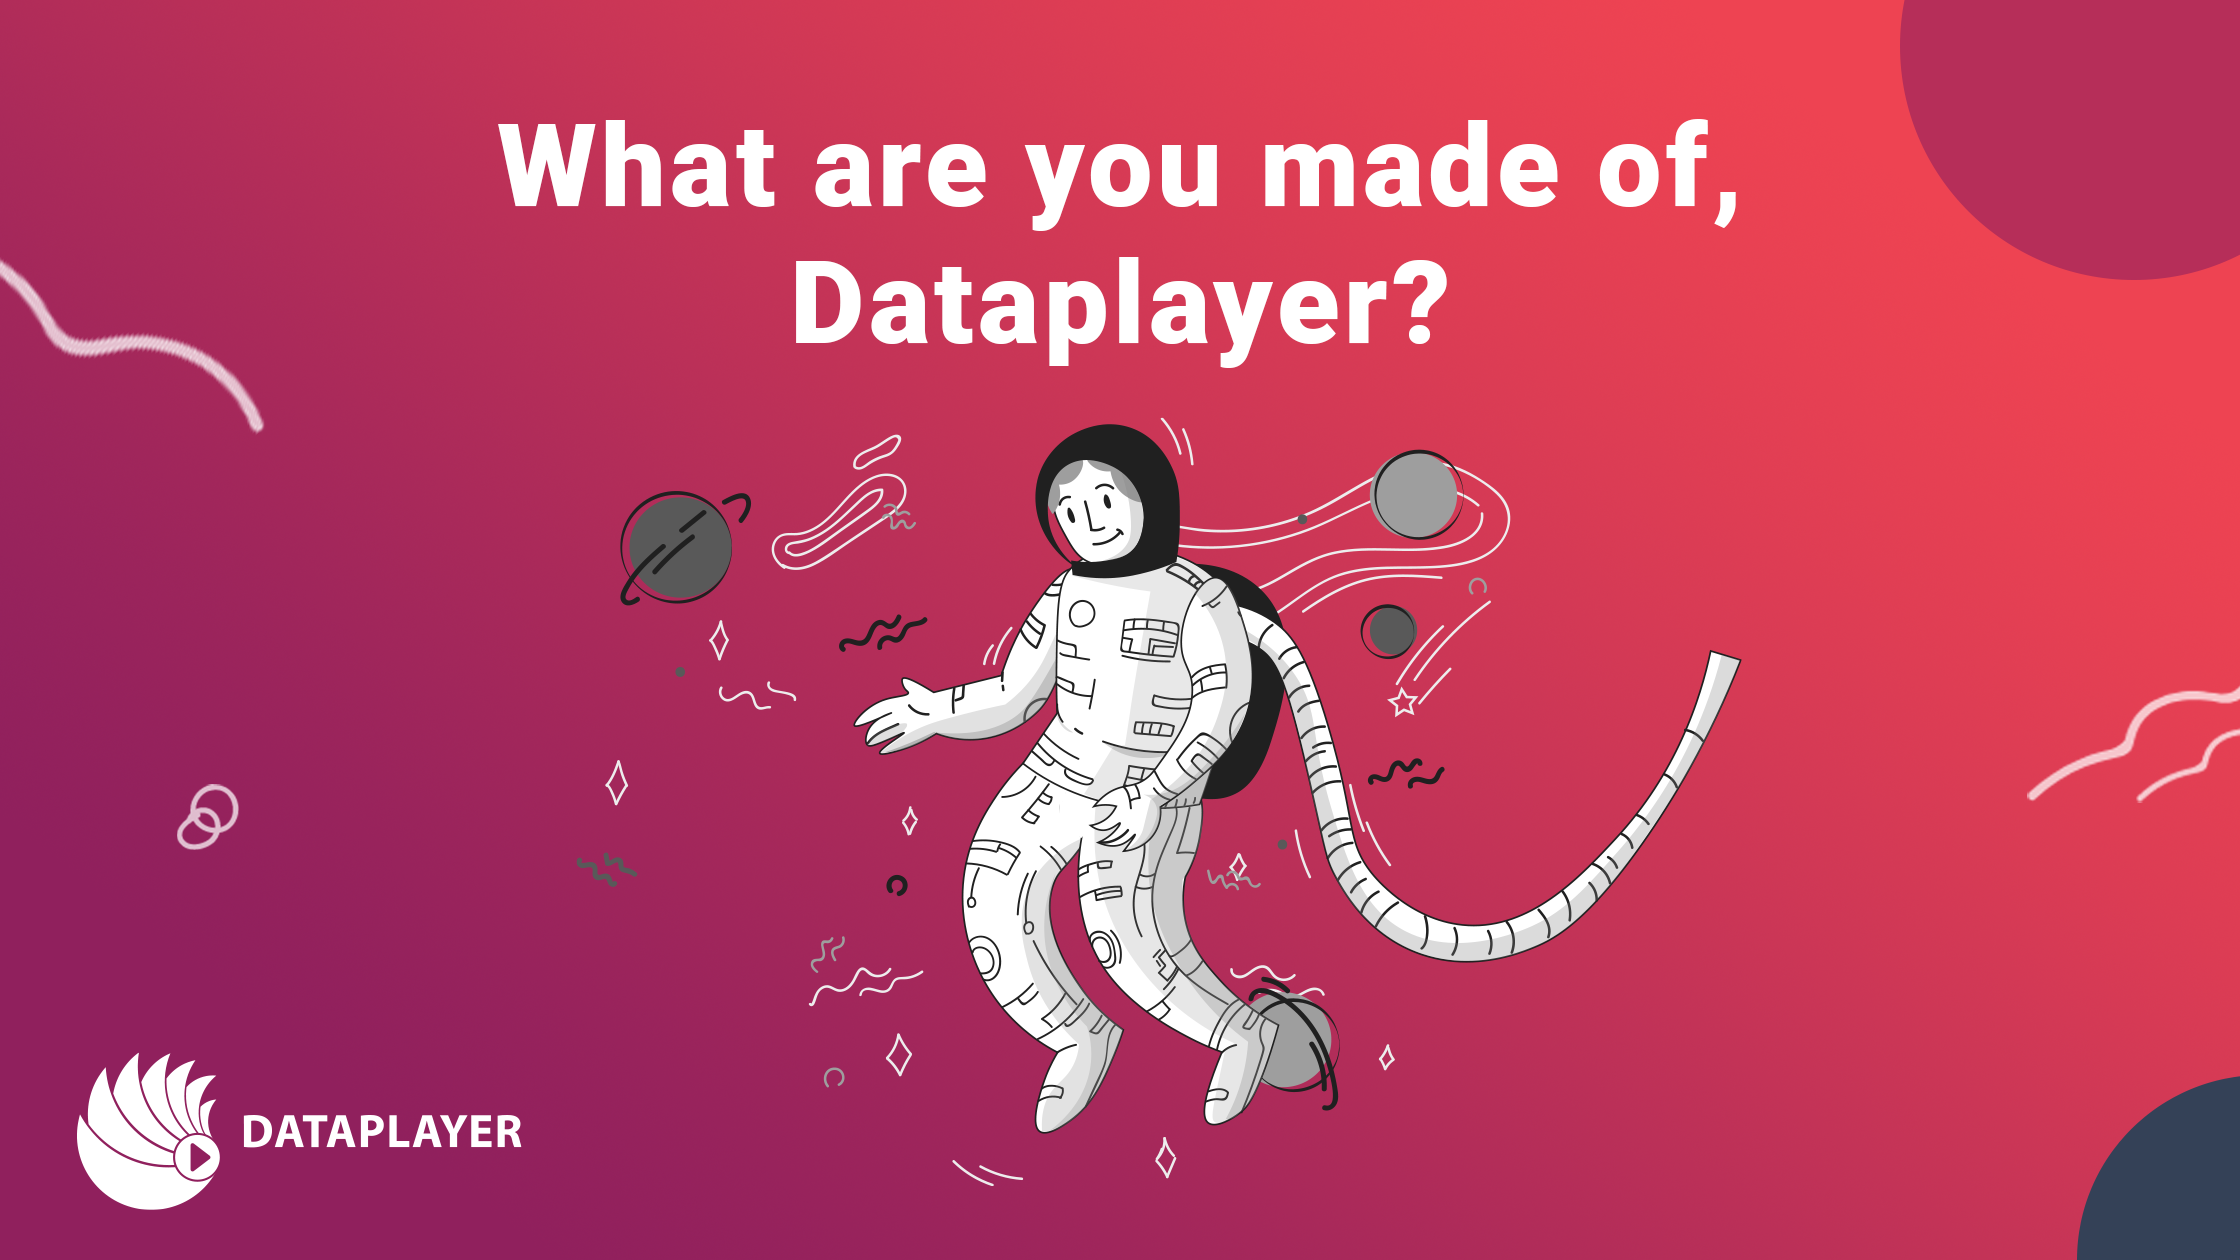 What are you made of, Dataplayer?